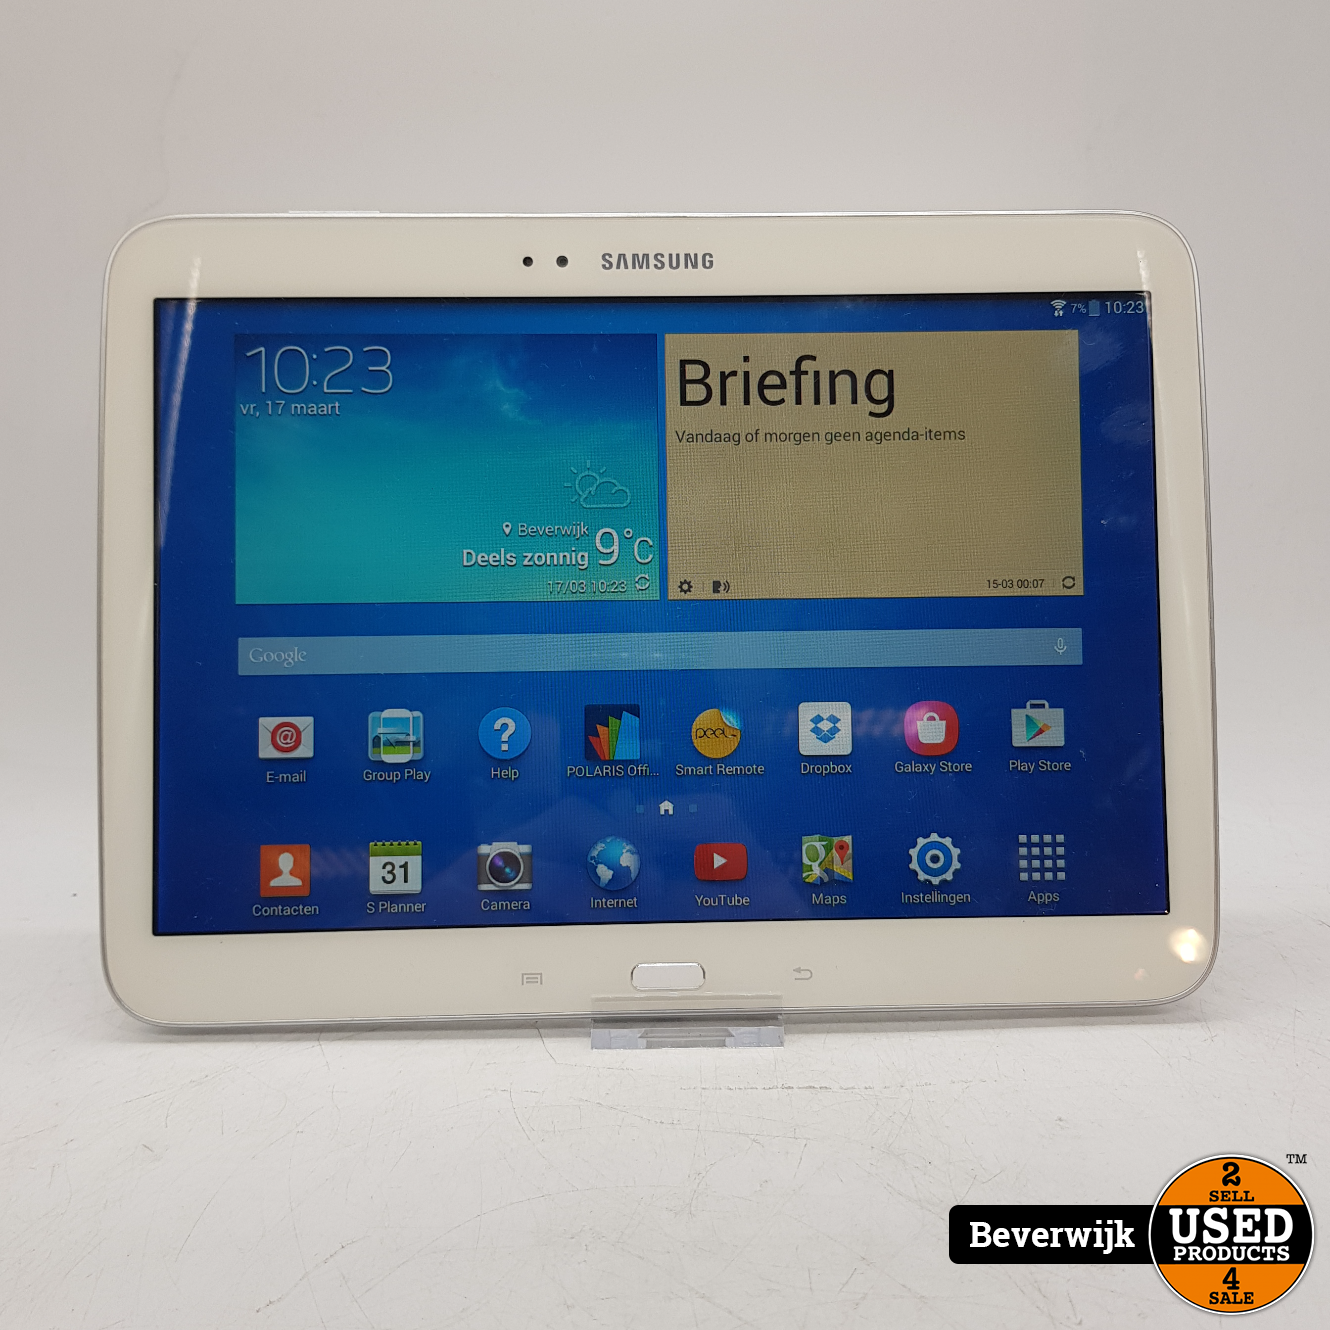 Sicilië Sanctie Oproepen 18-03 Samsung Galaxy Tab 3 16GB Android 4 10 inch in Goede staat - Used  Products Beverwijk